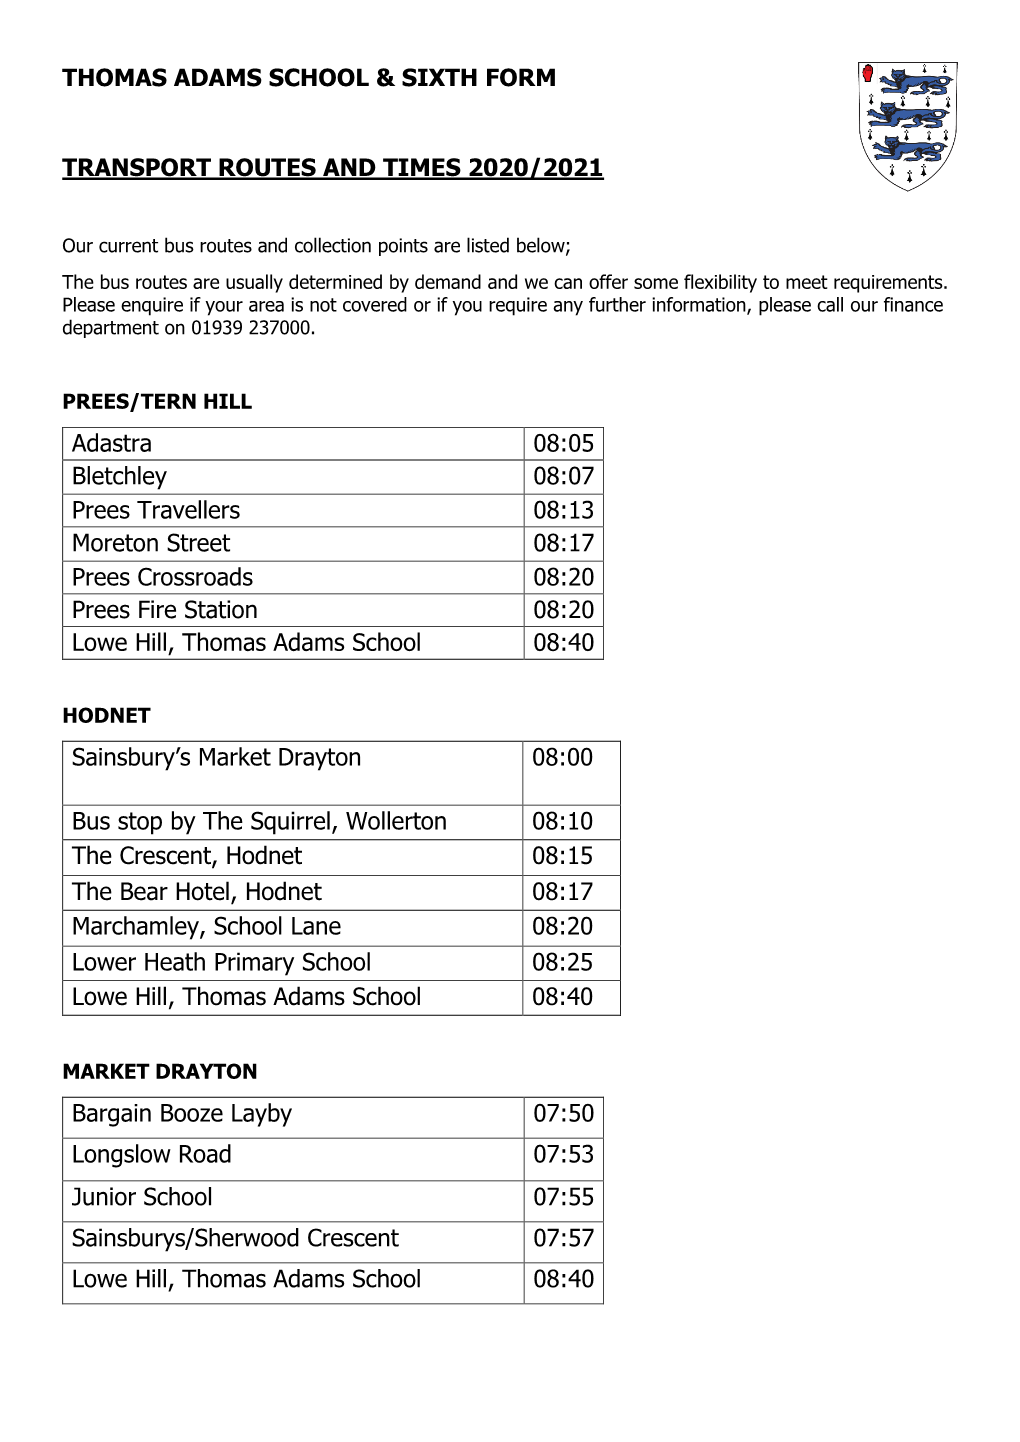 Thomas Adams School & Sixth Form Transport Routes and Times 2020/2021